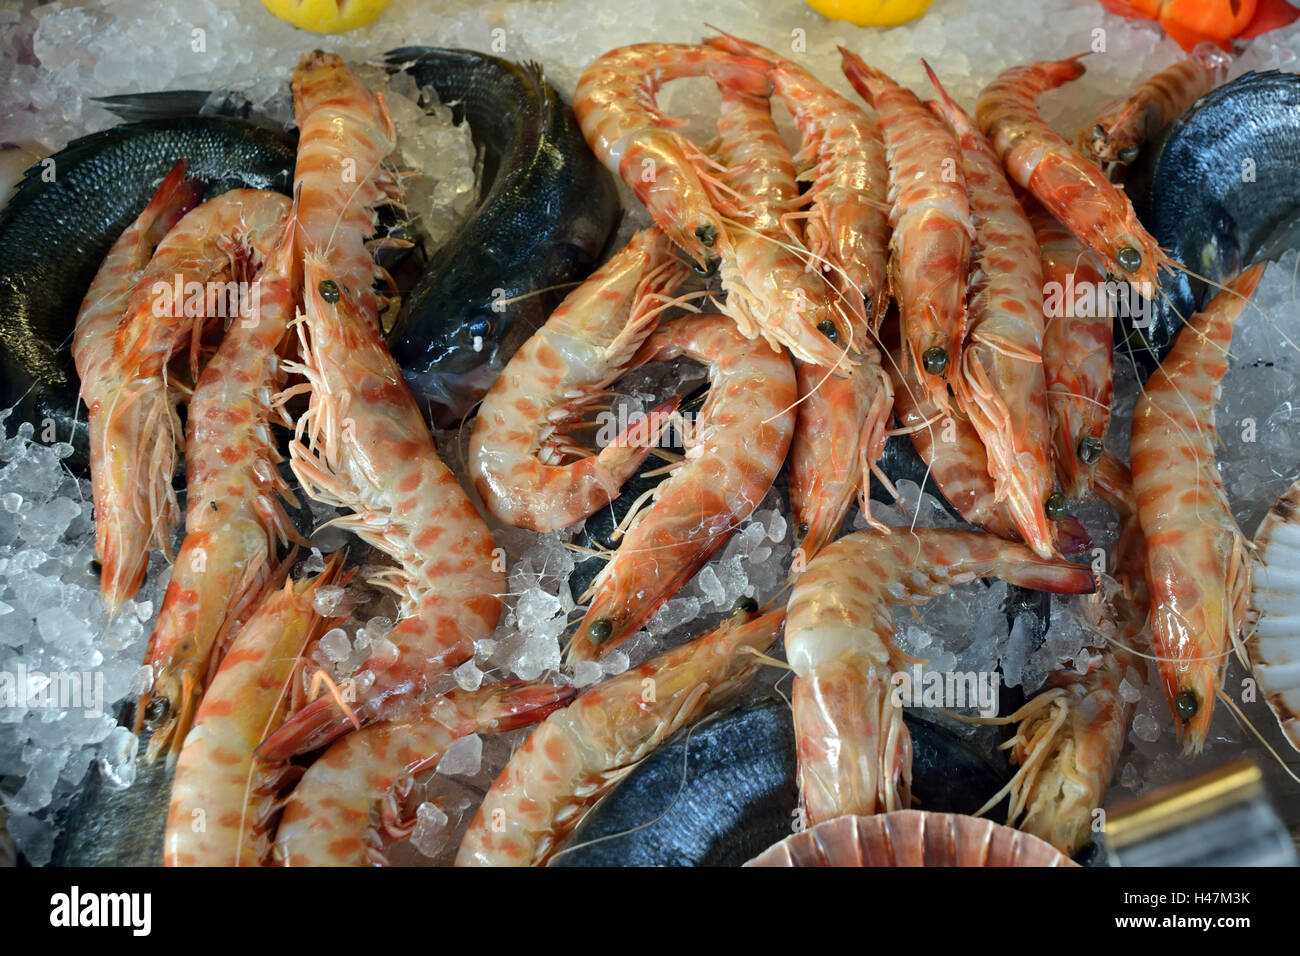 Seafood from the Adriatic Sea on a fish market on the Rialto Bridge of Venice in Italy. Stock Photo